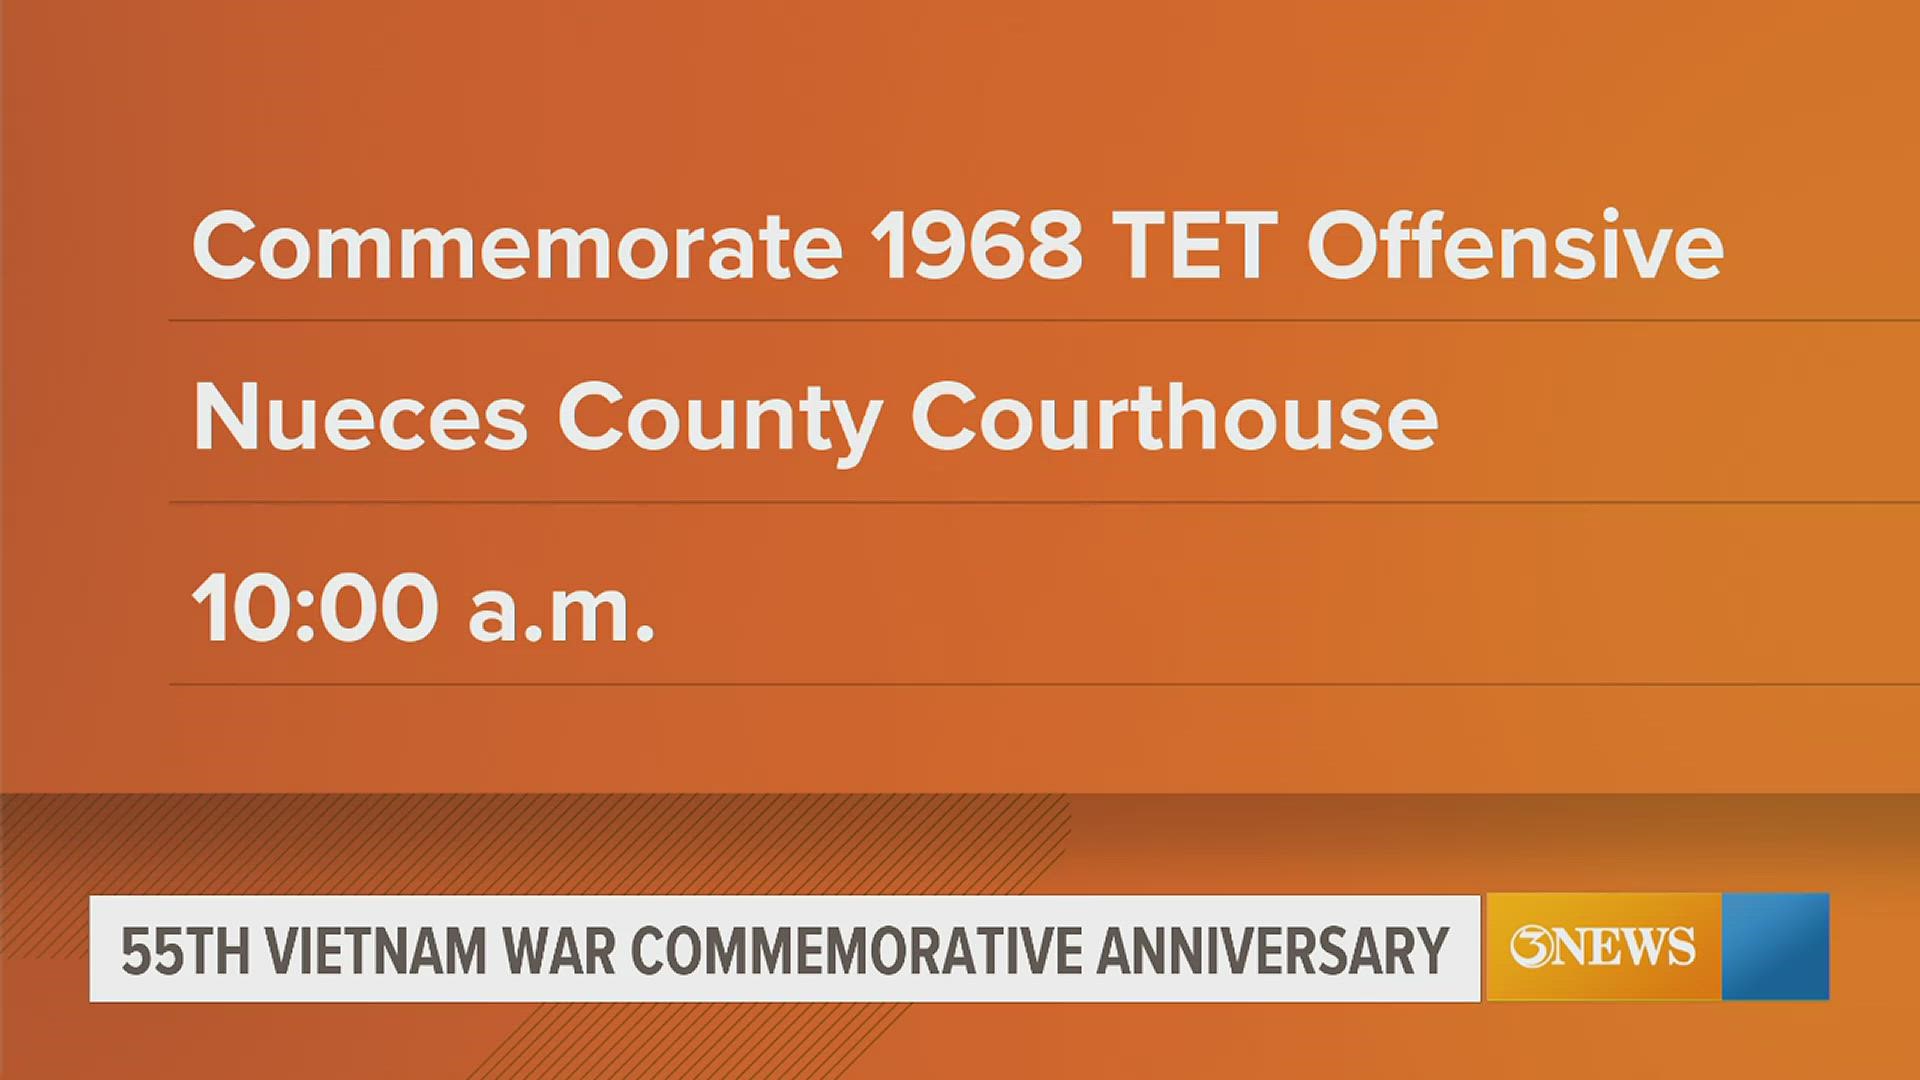 The ceremony begins at 10 a.m. at the Nueces County Courthouse.